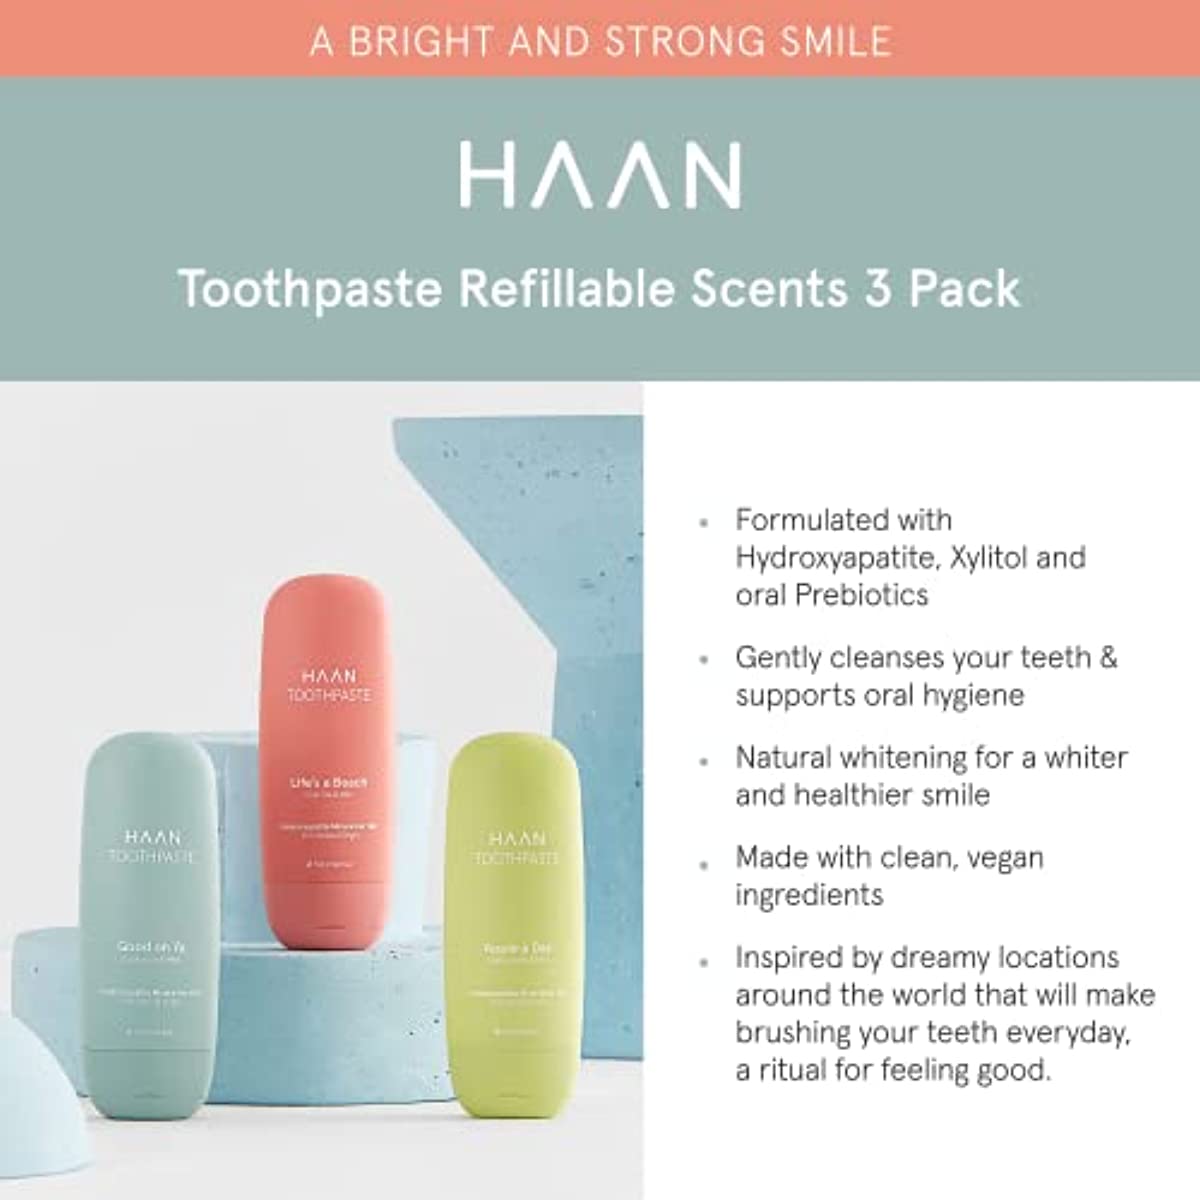 HAAN Natural Toothpaste Made with Clean, Vegan Ingredients for Cavity Protection | Parabens, Sulfates & Charcoal Free | 1 of Flavor of Each: Life\'s a Beach, Good on Ya & Apple Day, 1.86 fl. Oz.